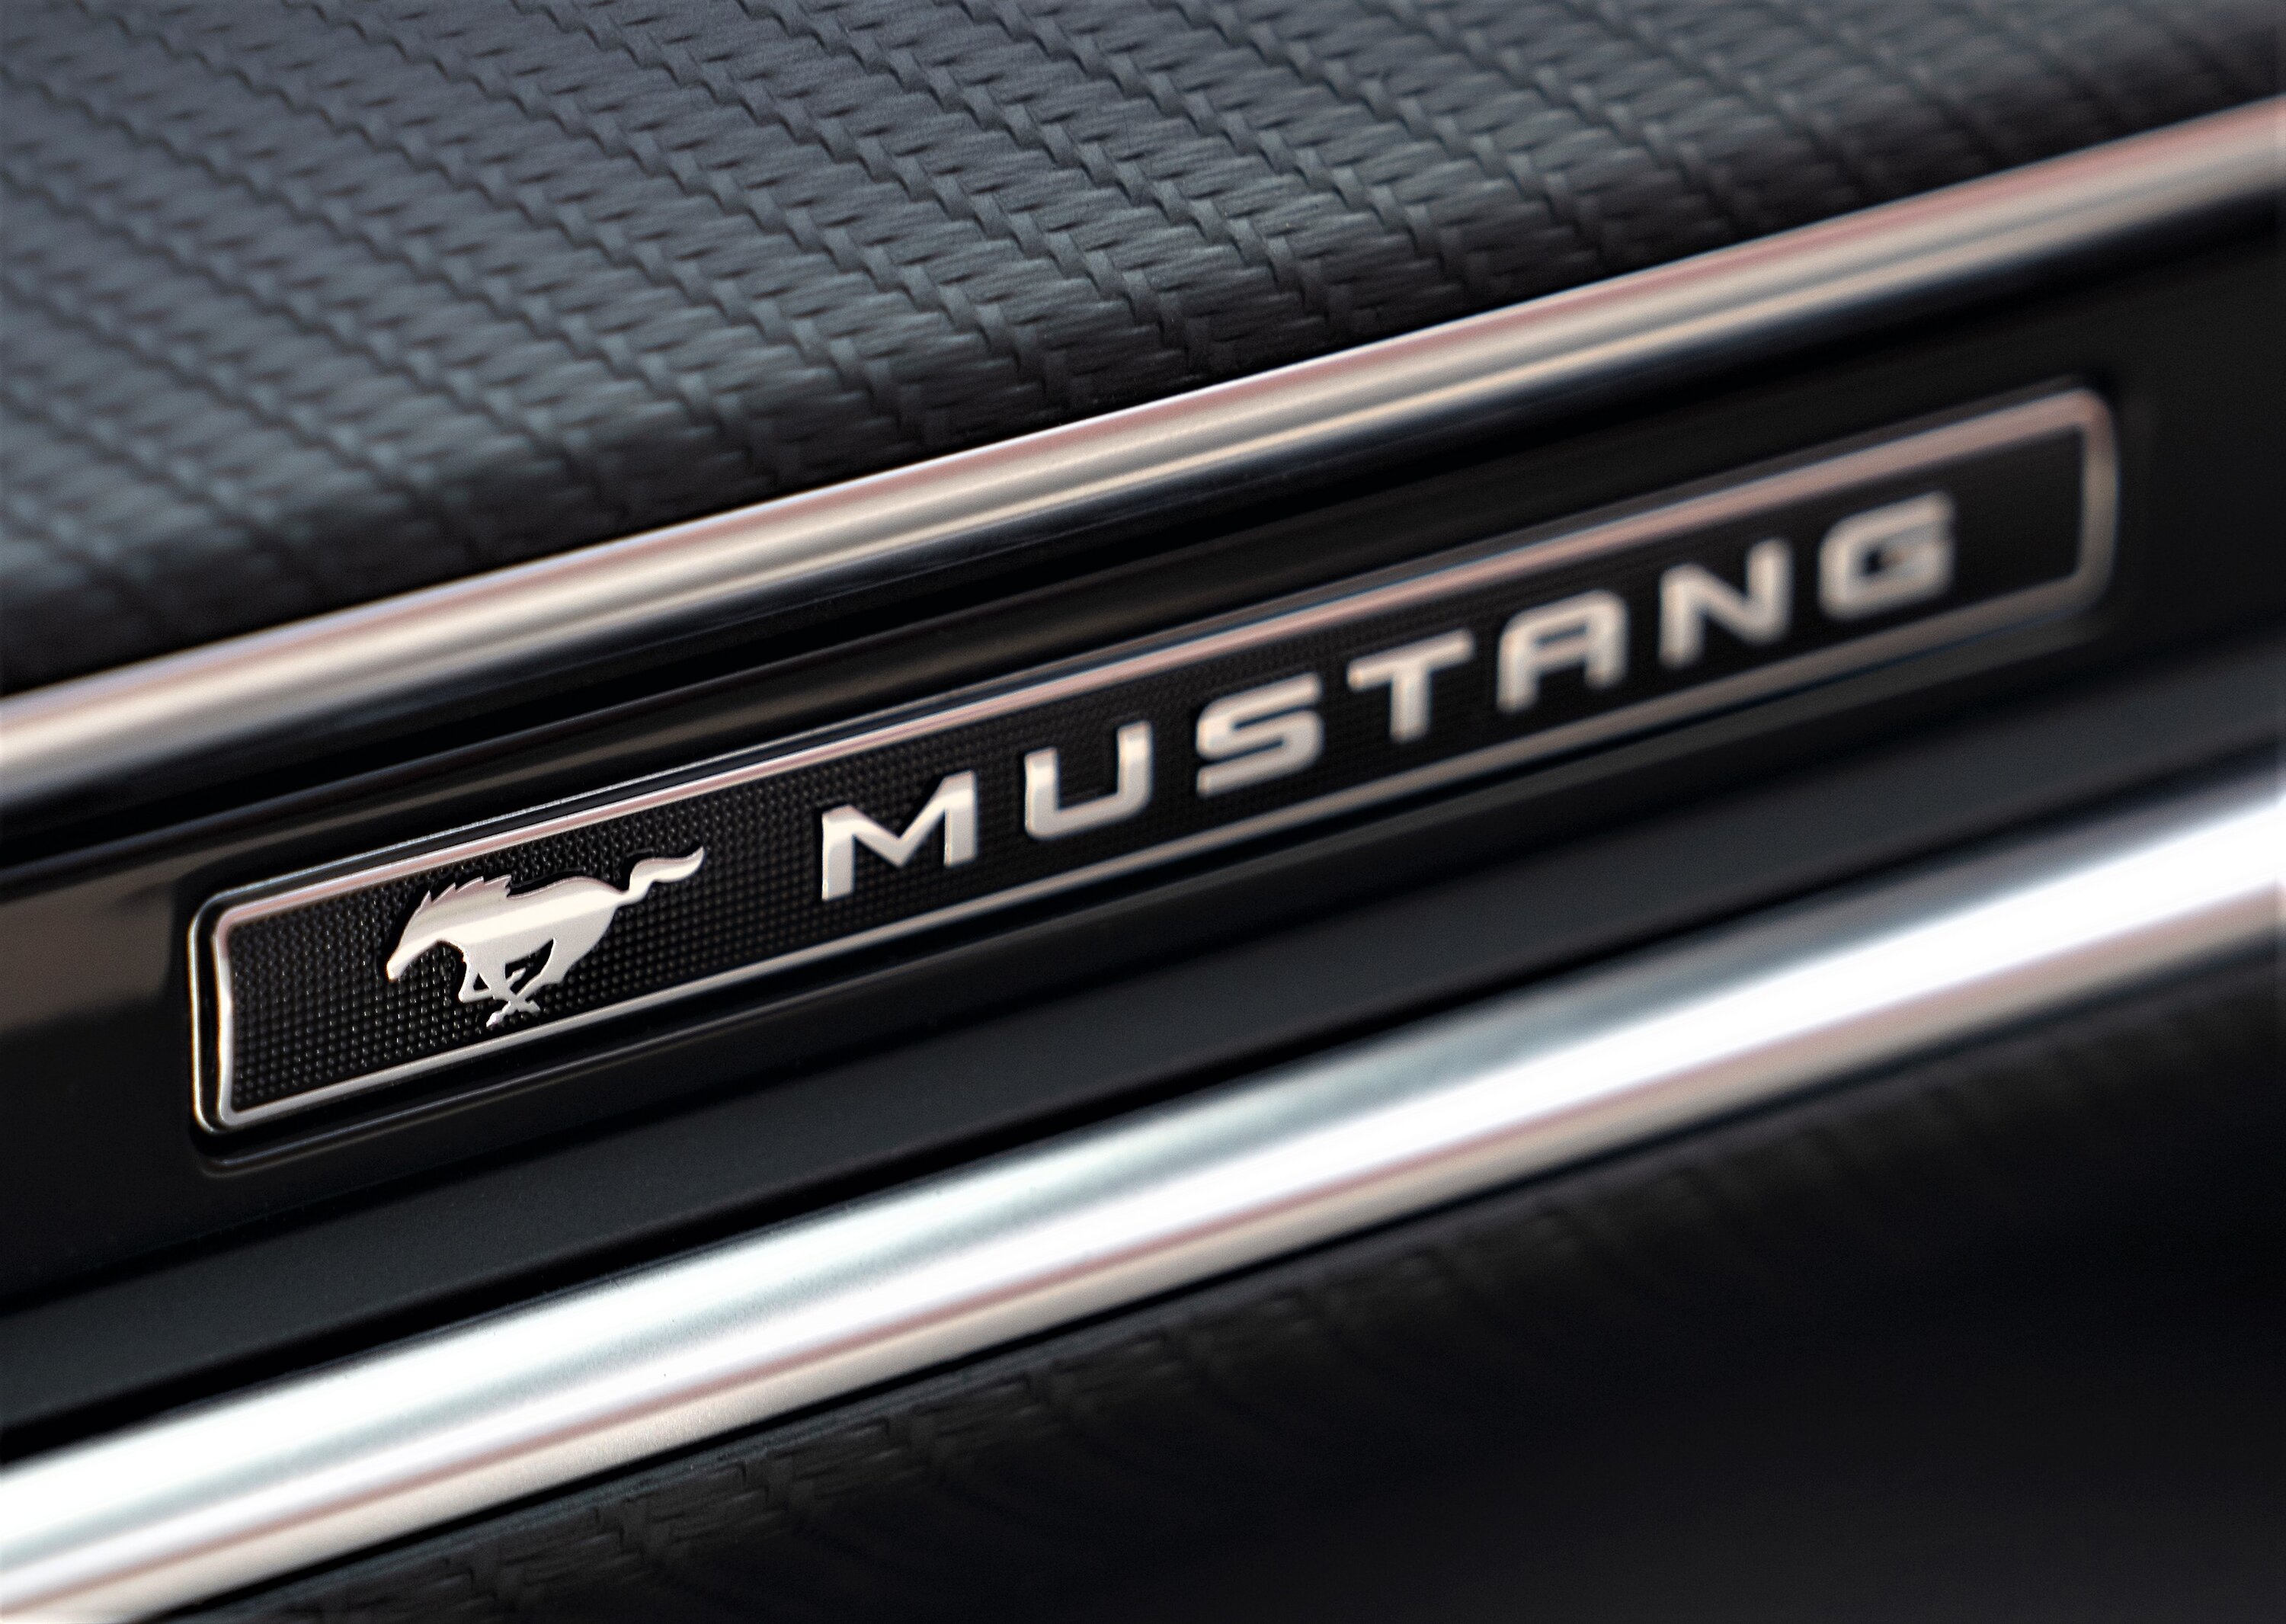 S650 Mustang ⚠️ LEAKED S650 Mustang Images & Rumored Specs!! [New Shots & Engine Image Added] Mustang 24 Interior badge